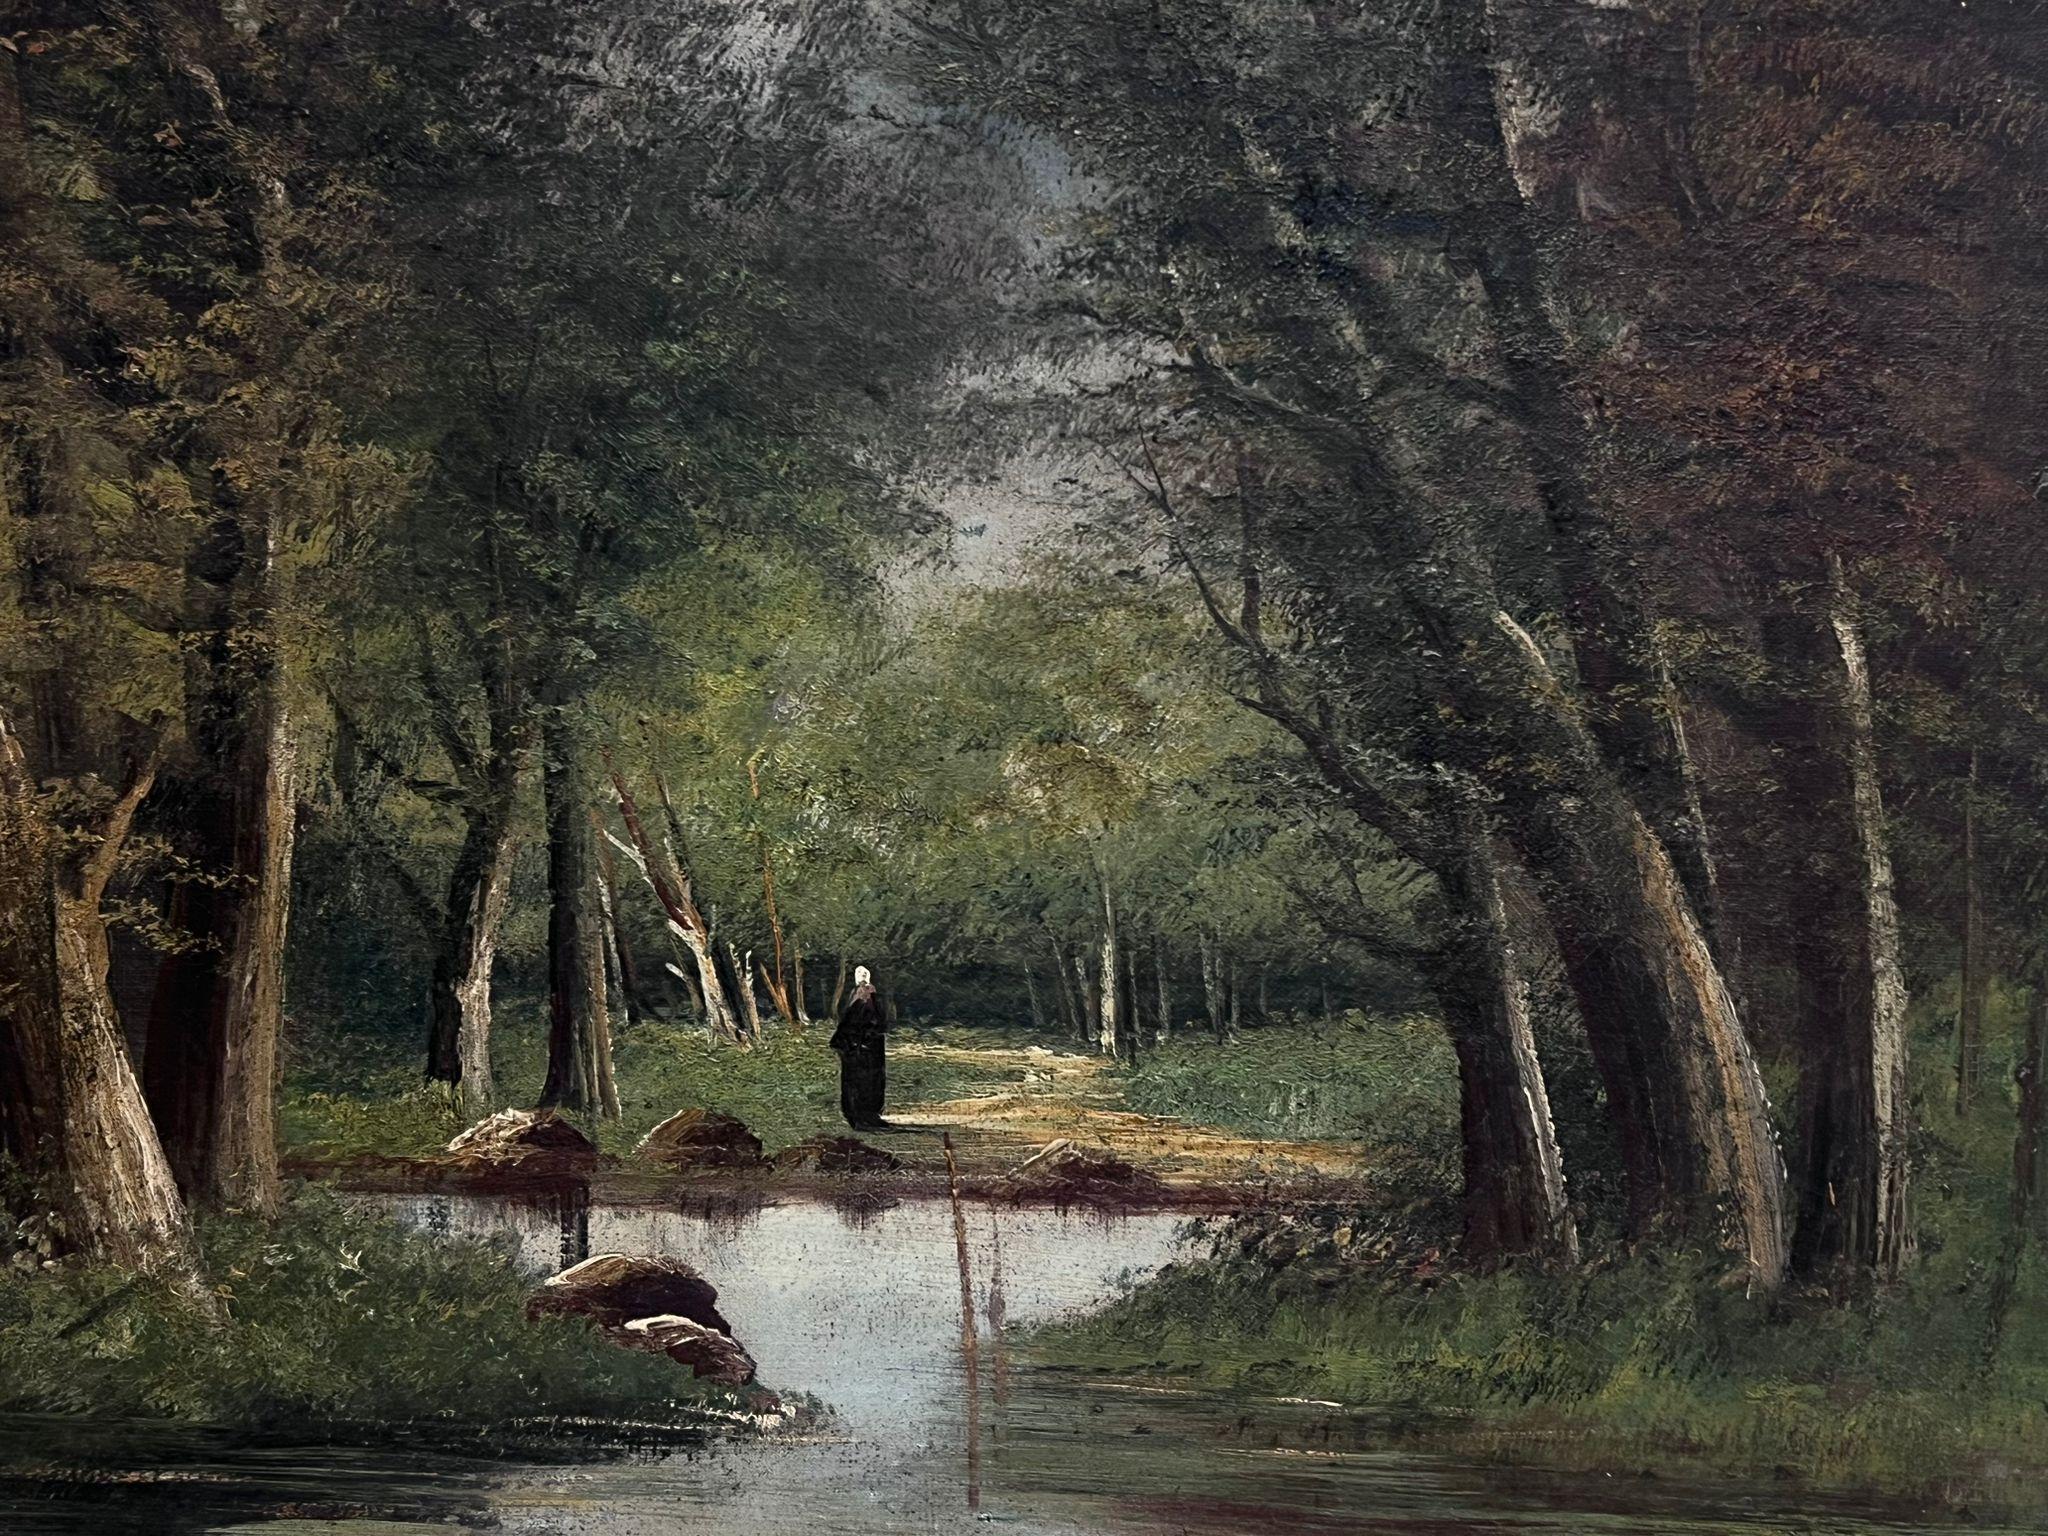 Walking in the Woods
French School, late 19th century
signed Maurice Bernard
signed oil on canvas, framed
framed: 24 x 28 inches
canvas: 21 x 26 inches
provenance: private collection, France
condition: good and sound condition